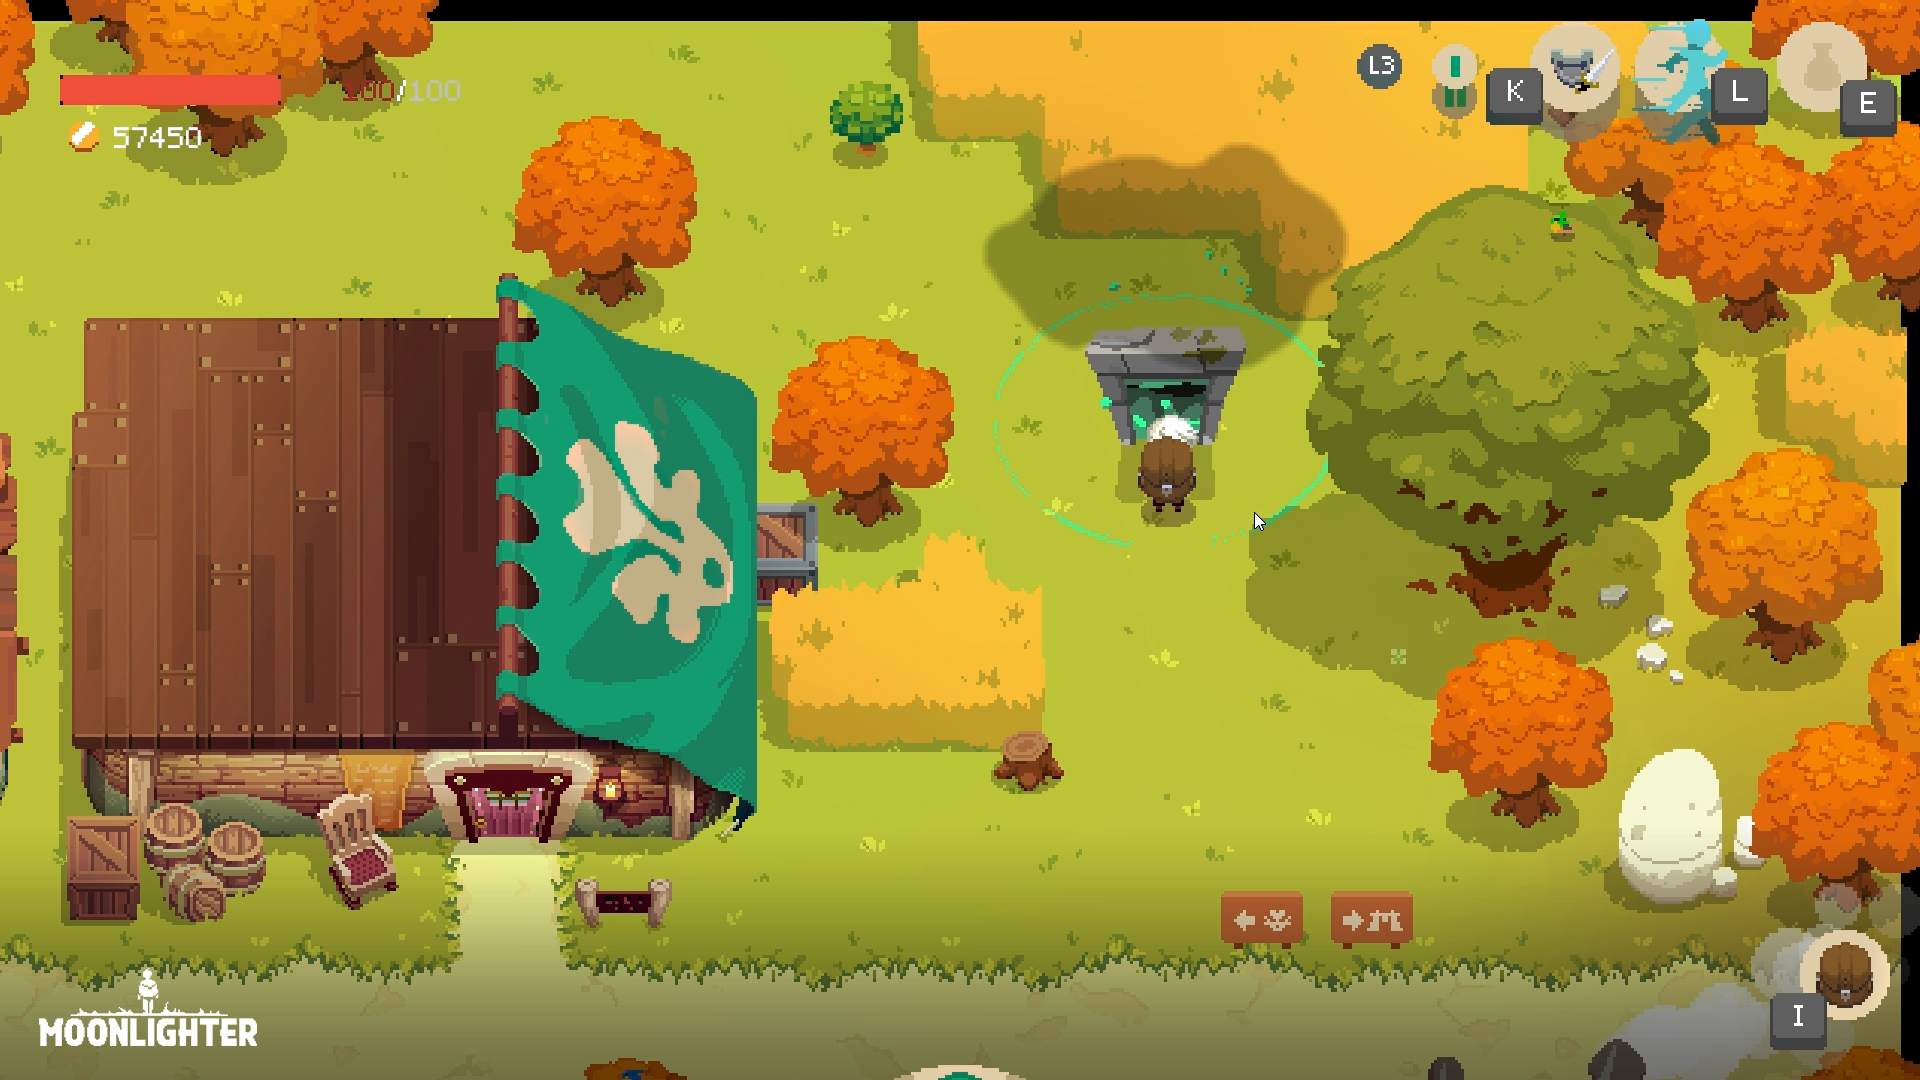 download moonlighter complete edition for free